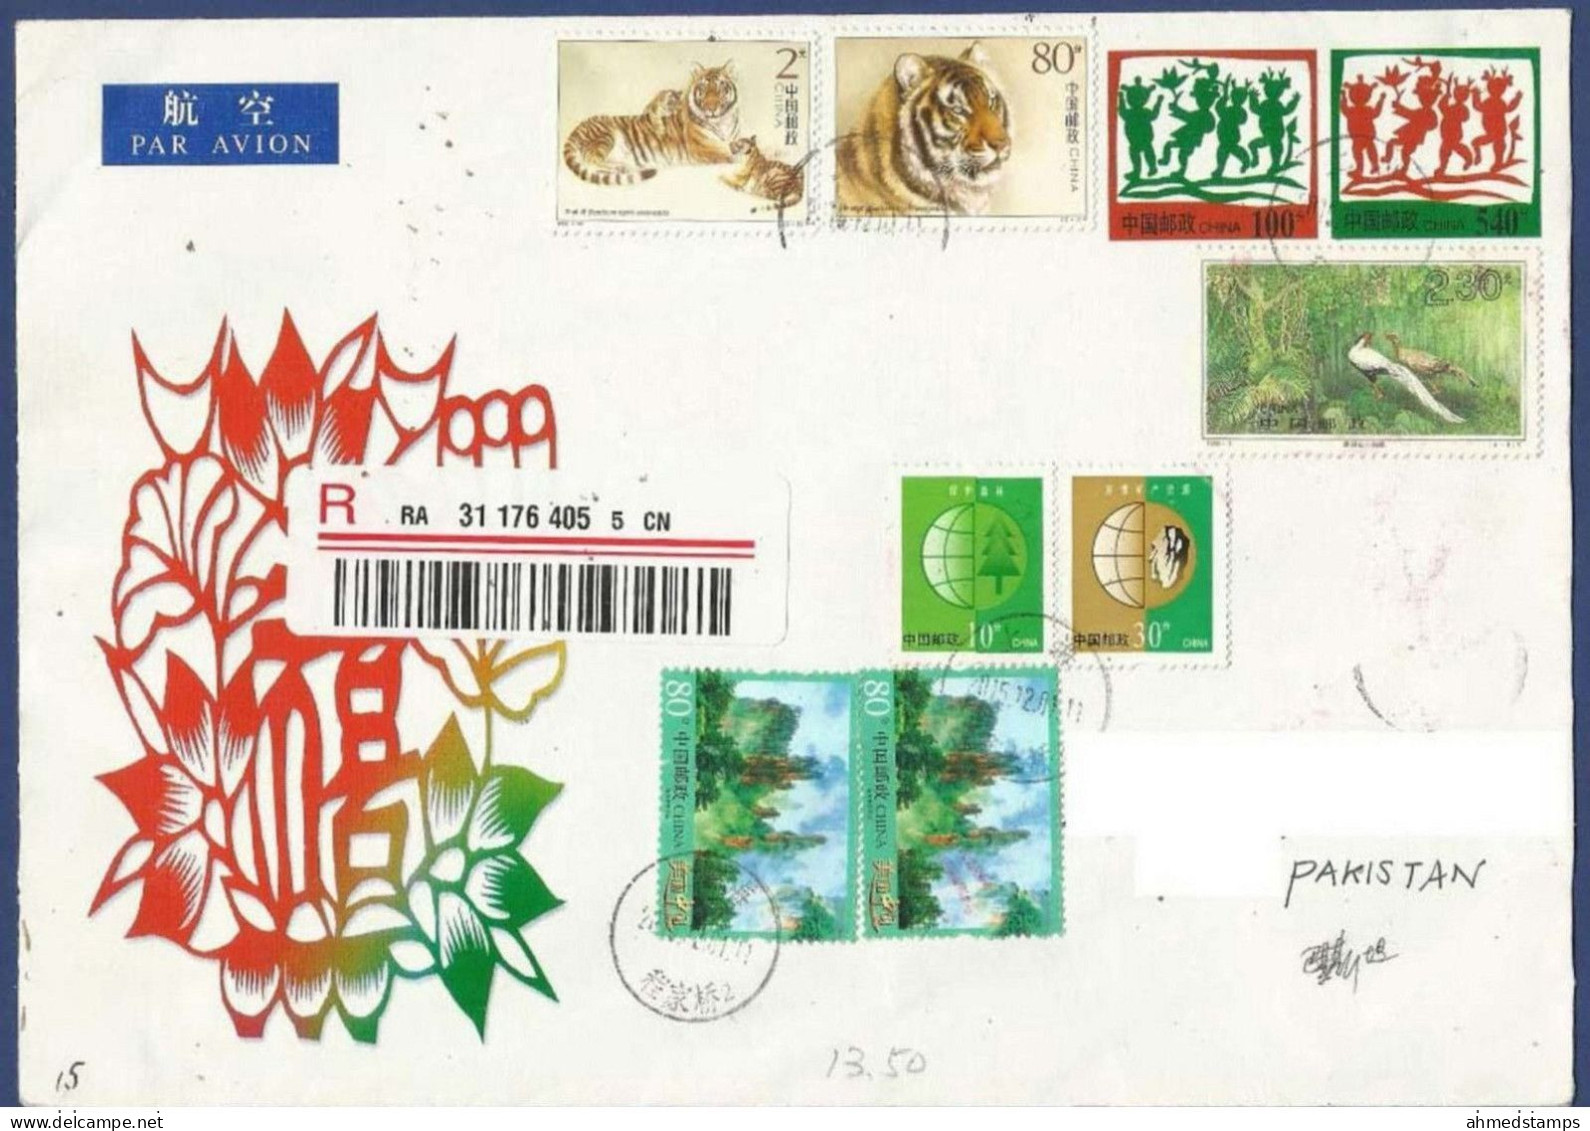 CHINA  REGISTERED POSTAL USED AIRMAIL COVER TO PAKISTAN - Luftpost